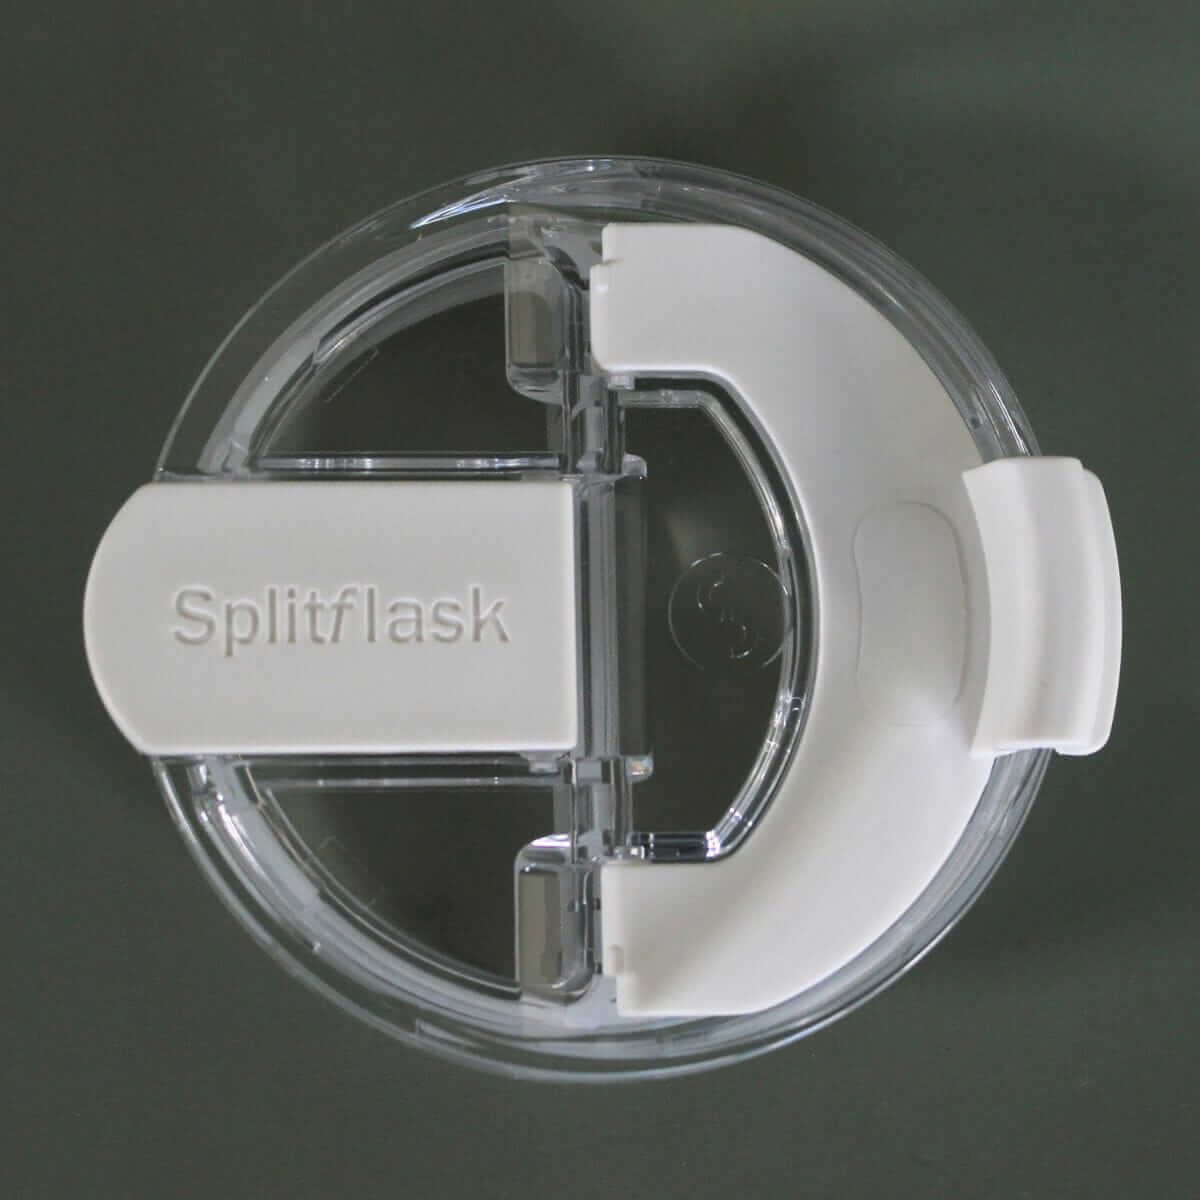 Image of the Splitflask hot and cold tumbler lid